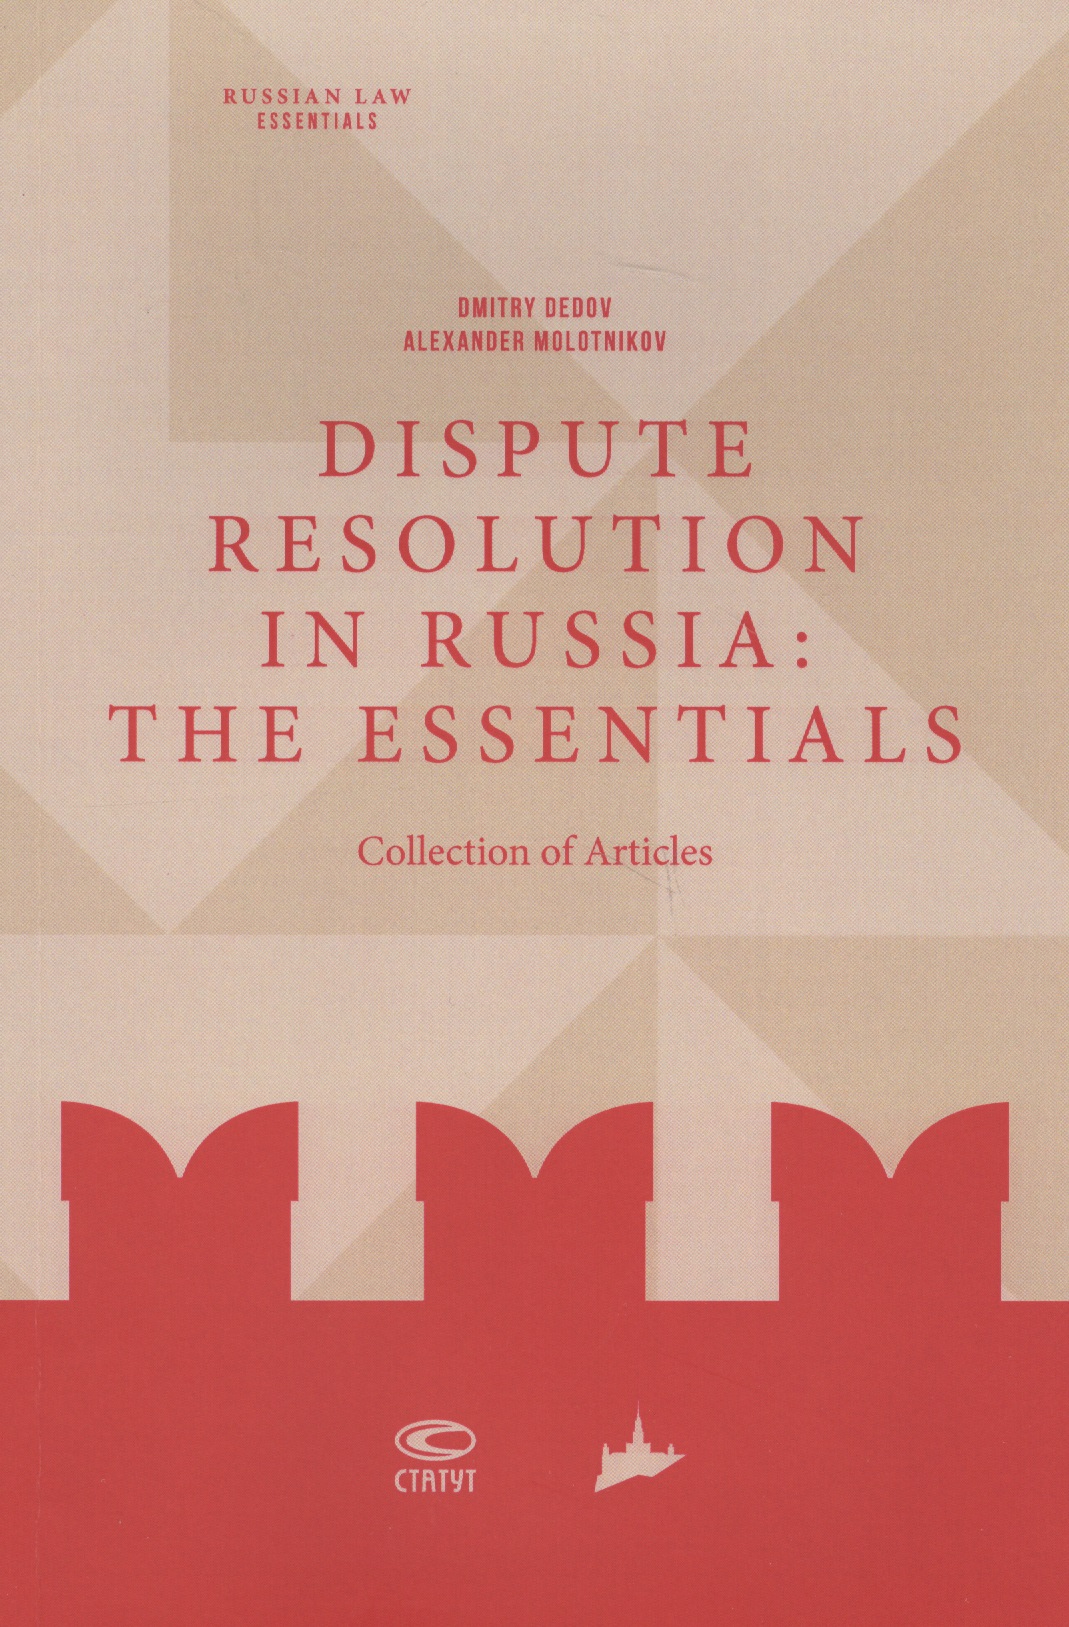 Дедов Дмитрий Иванович Dispute resolution in Russia: the essentials (collection of articles) macomber debbie if not for you